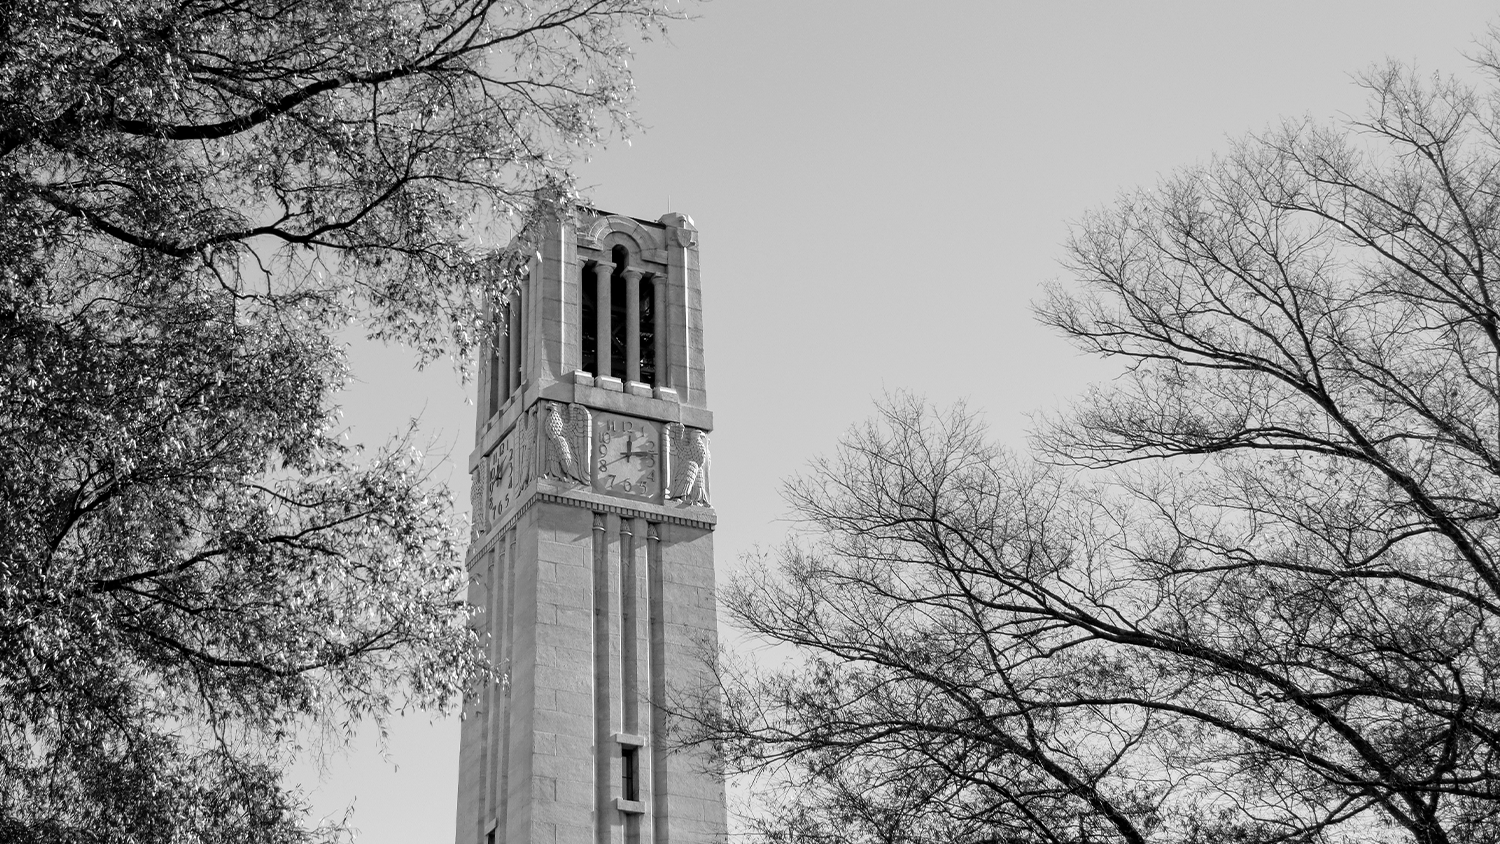 The Memorial Belltower in black and white